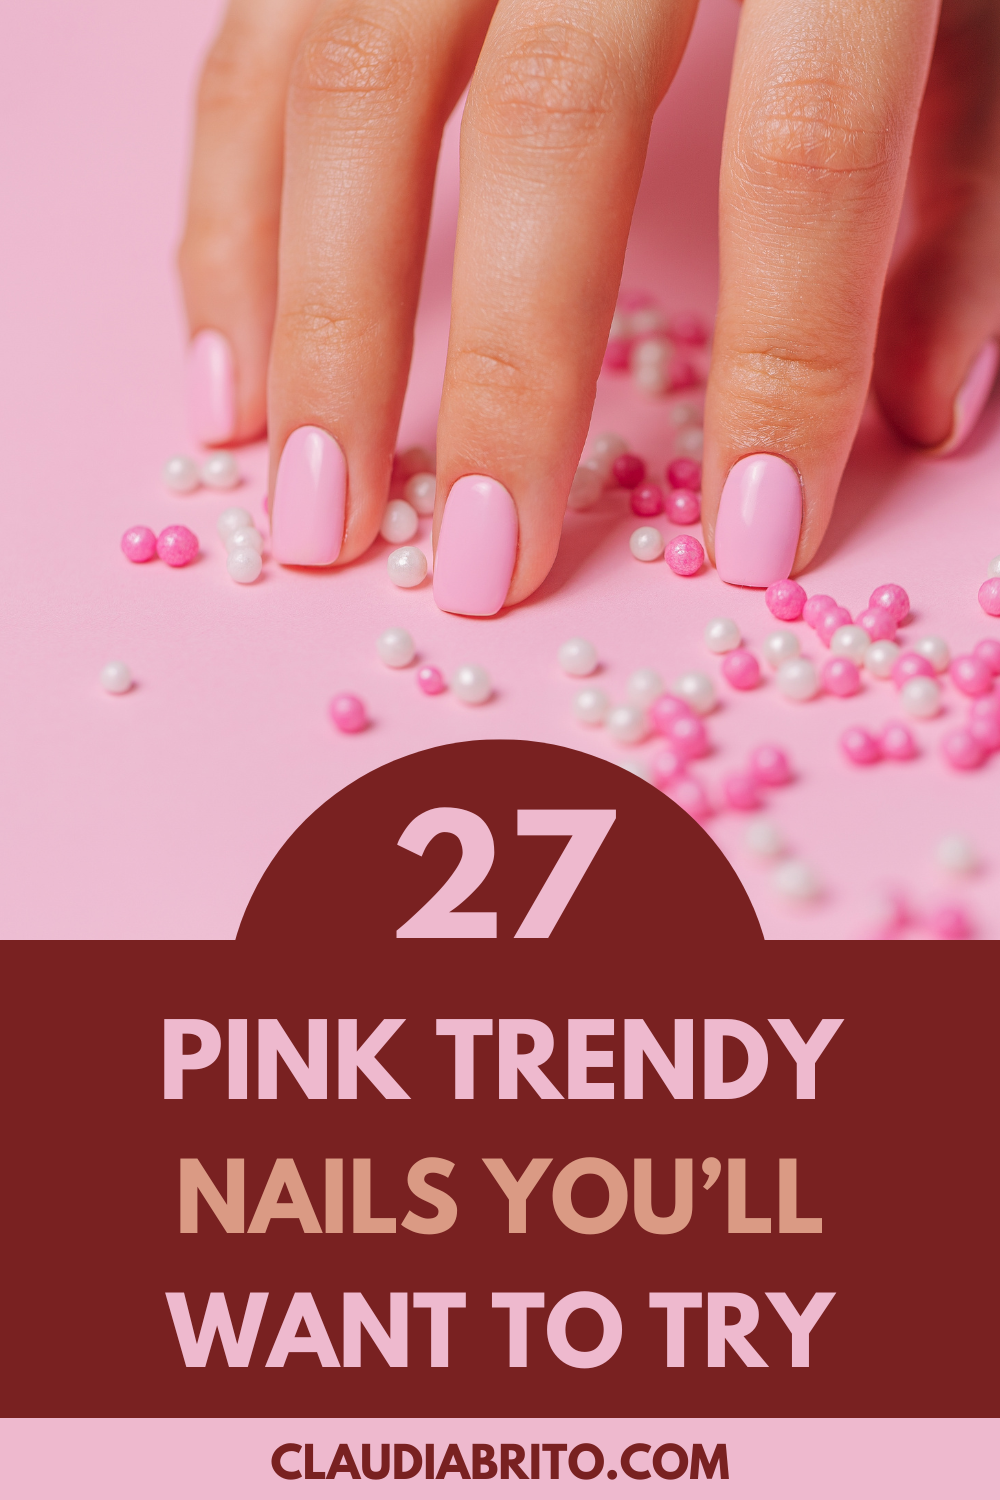 Pink Trendy Nails You'll Want To Try